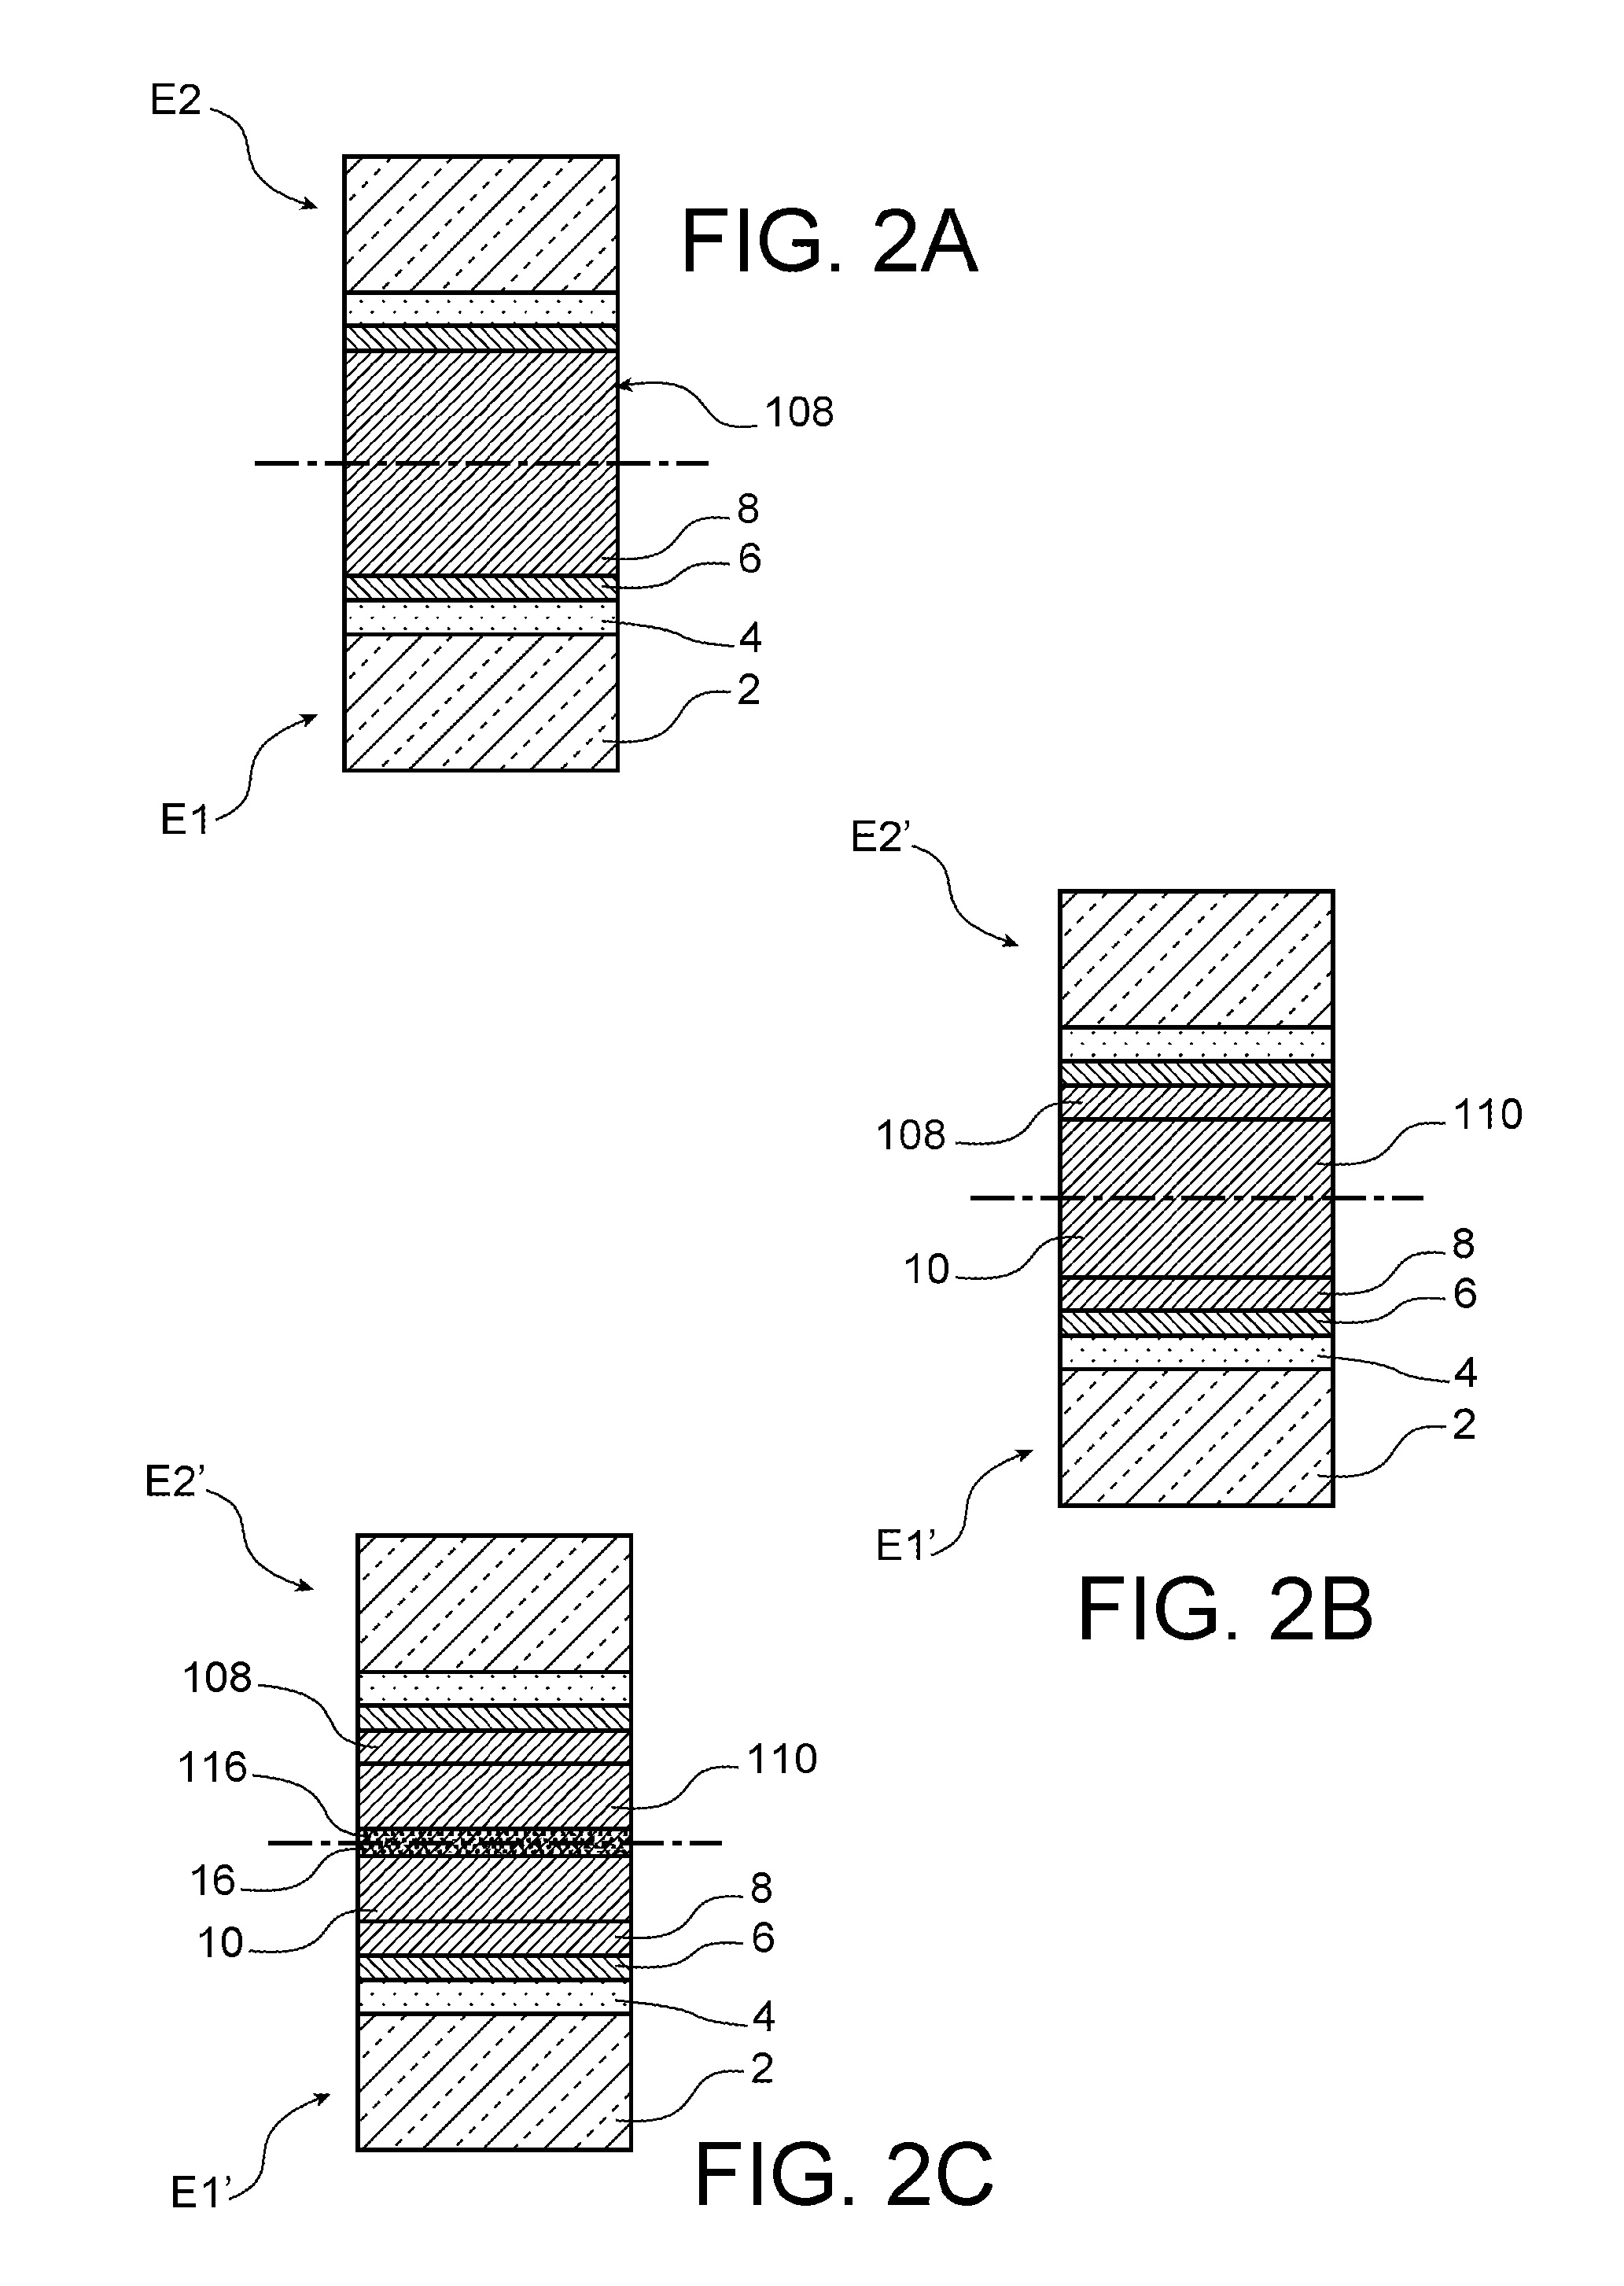 Process for producing a structure by assembling at least two elements by direct adhesive bonding